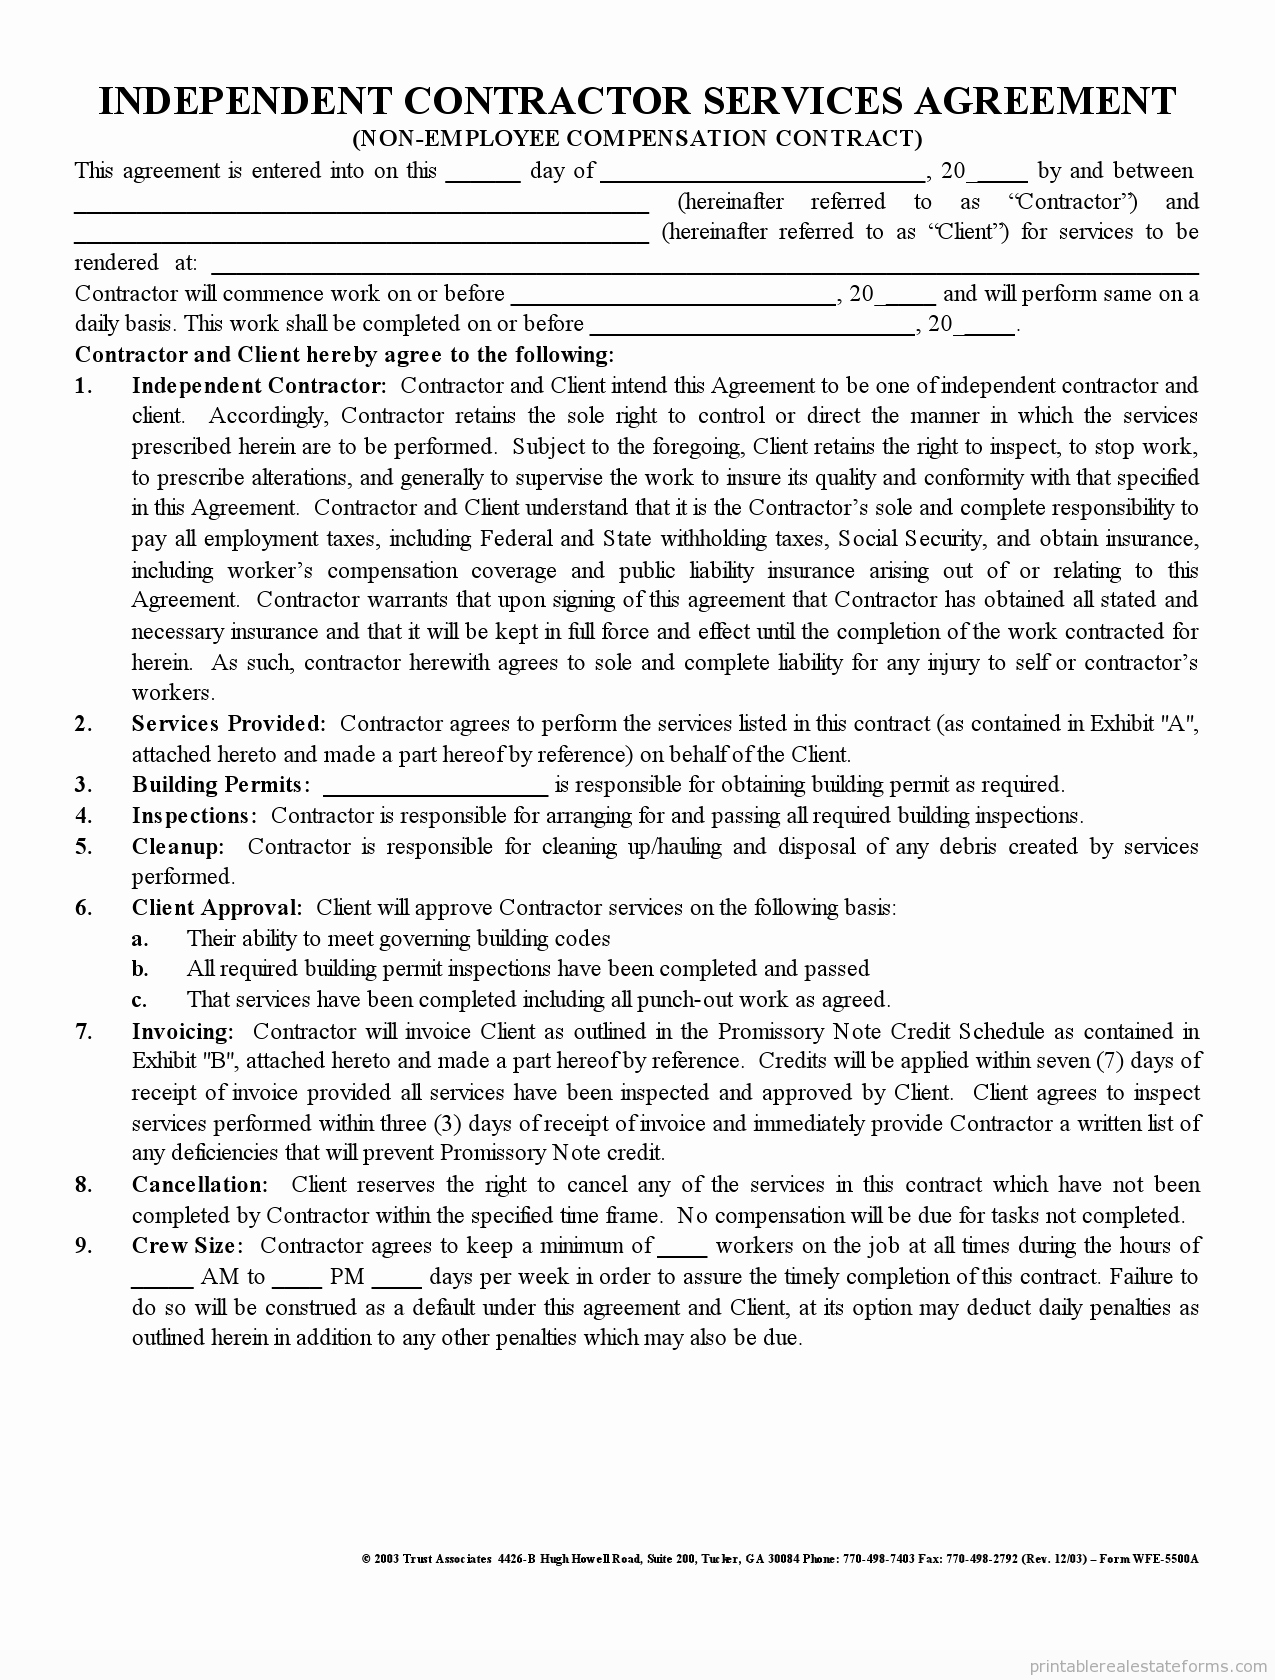 Free Remodeling Contract Template Awesome Free Printable Independent Contractor Agreement form